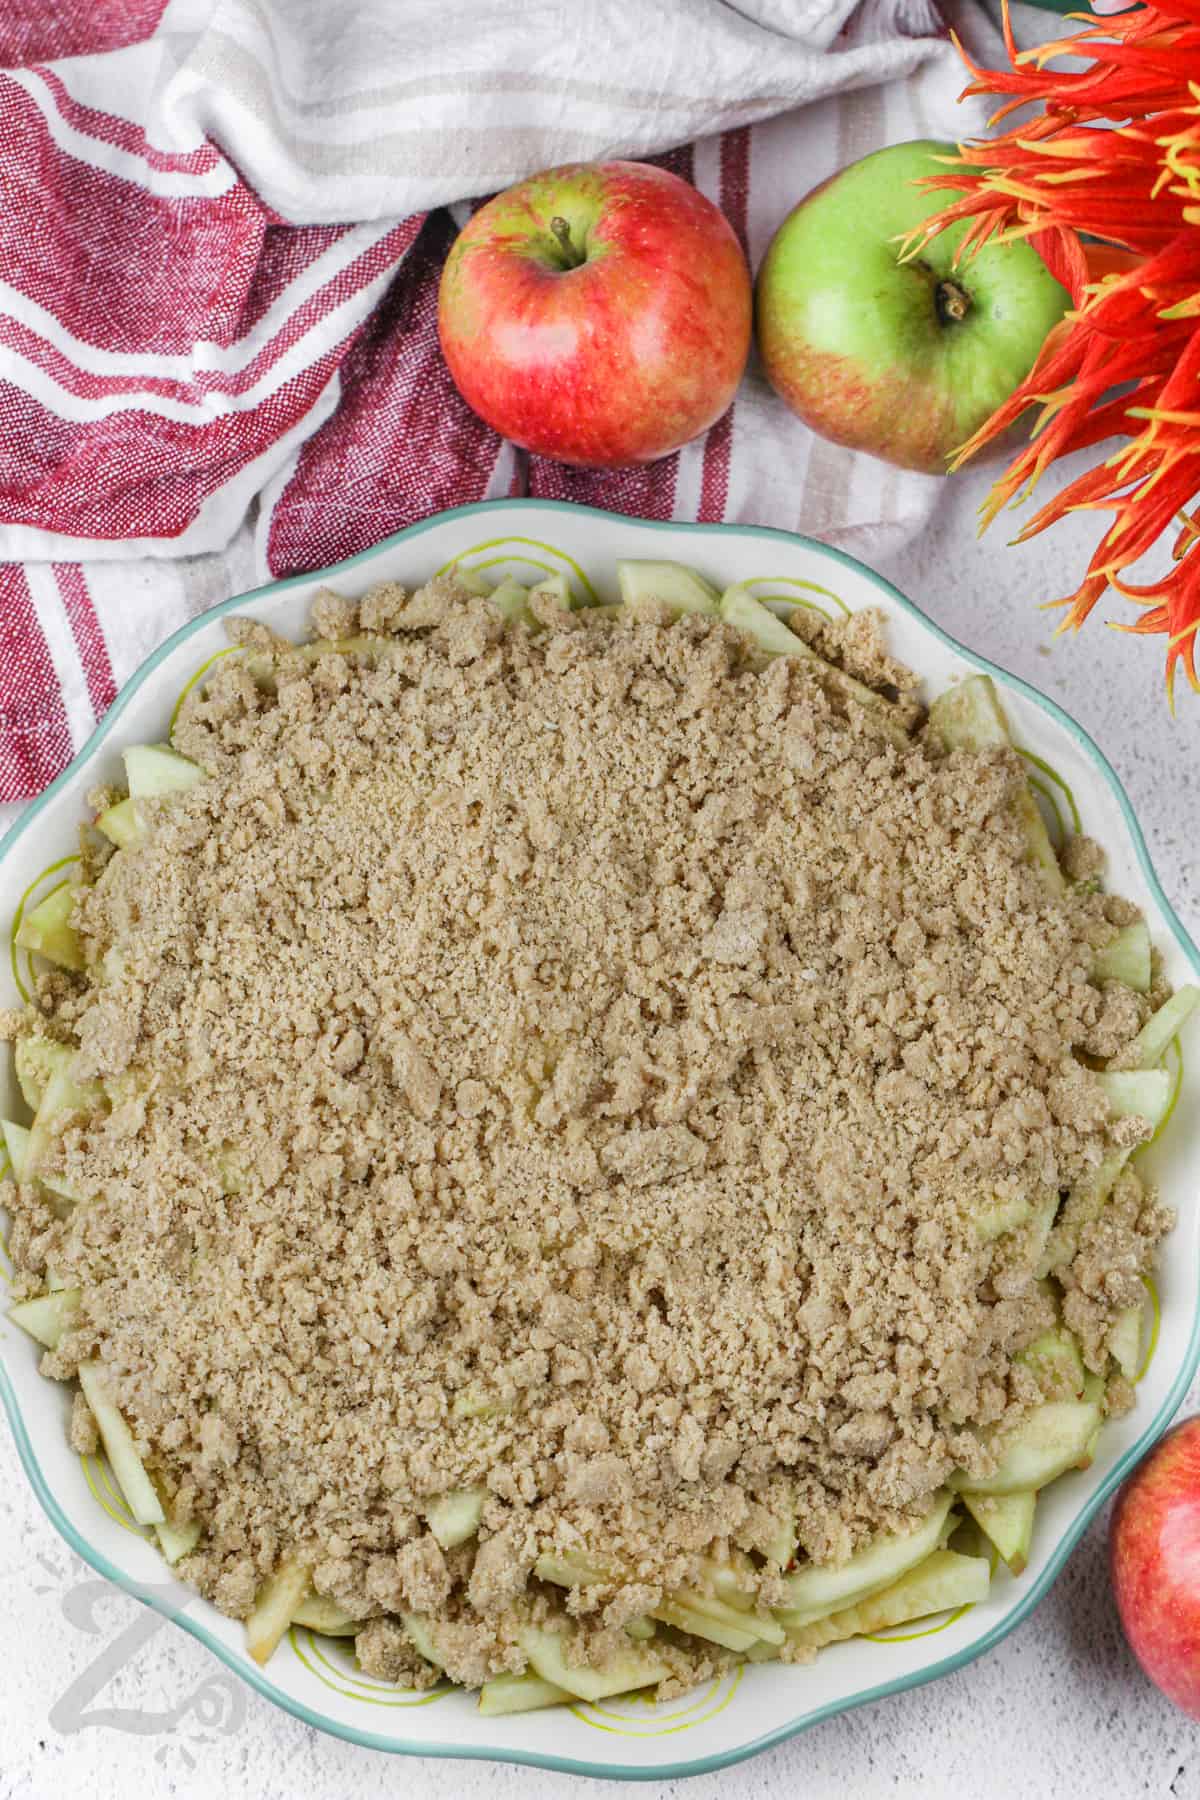 unbaked Apple Crumble in a dish